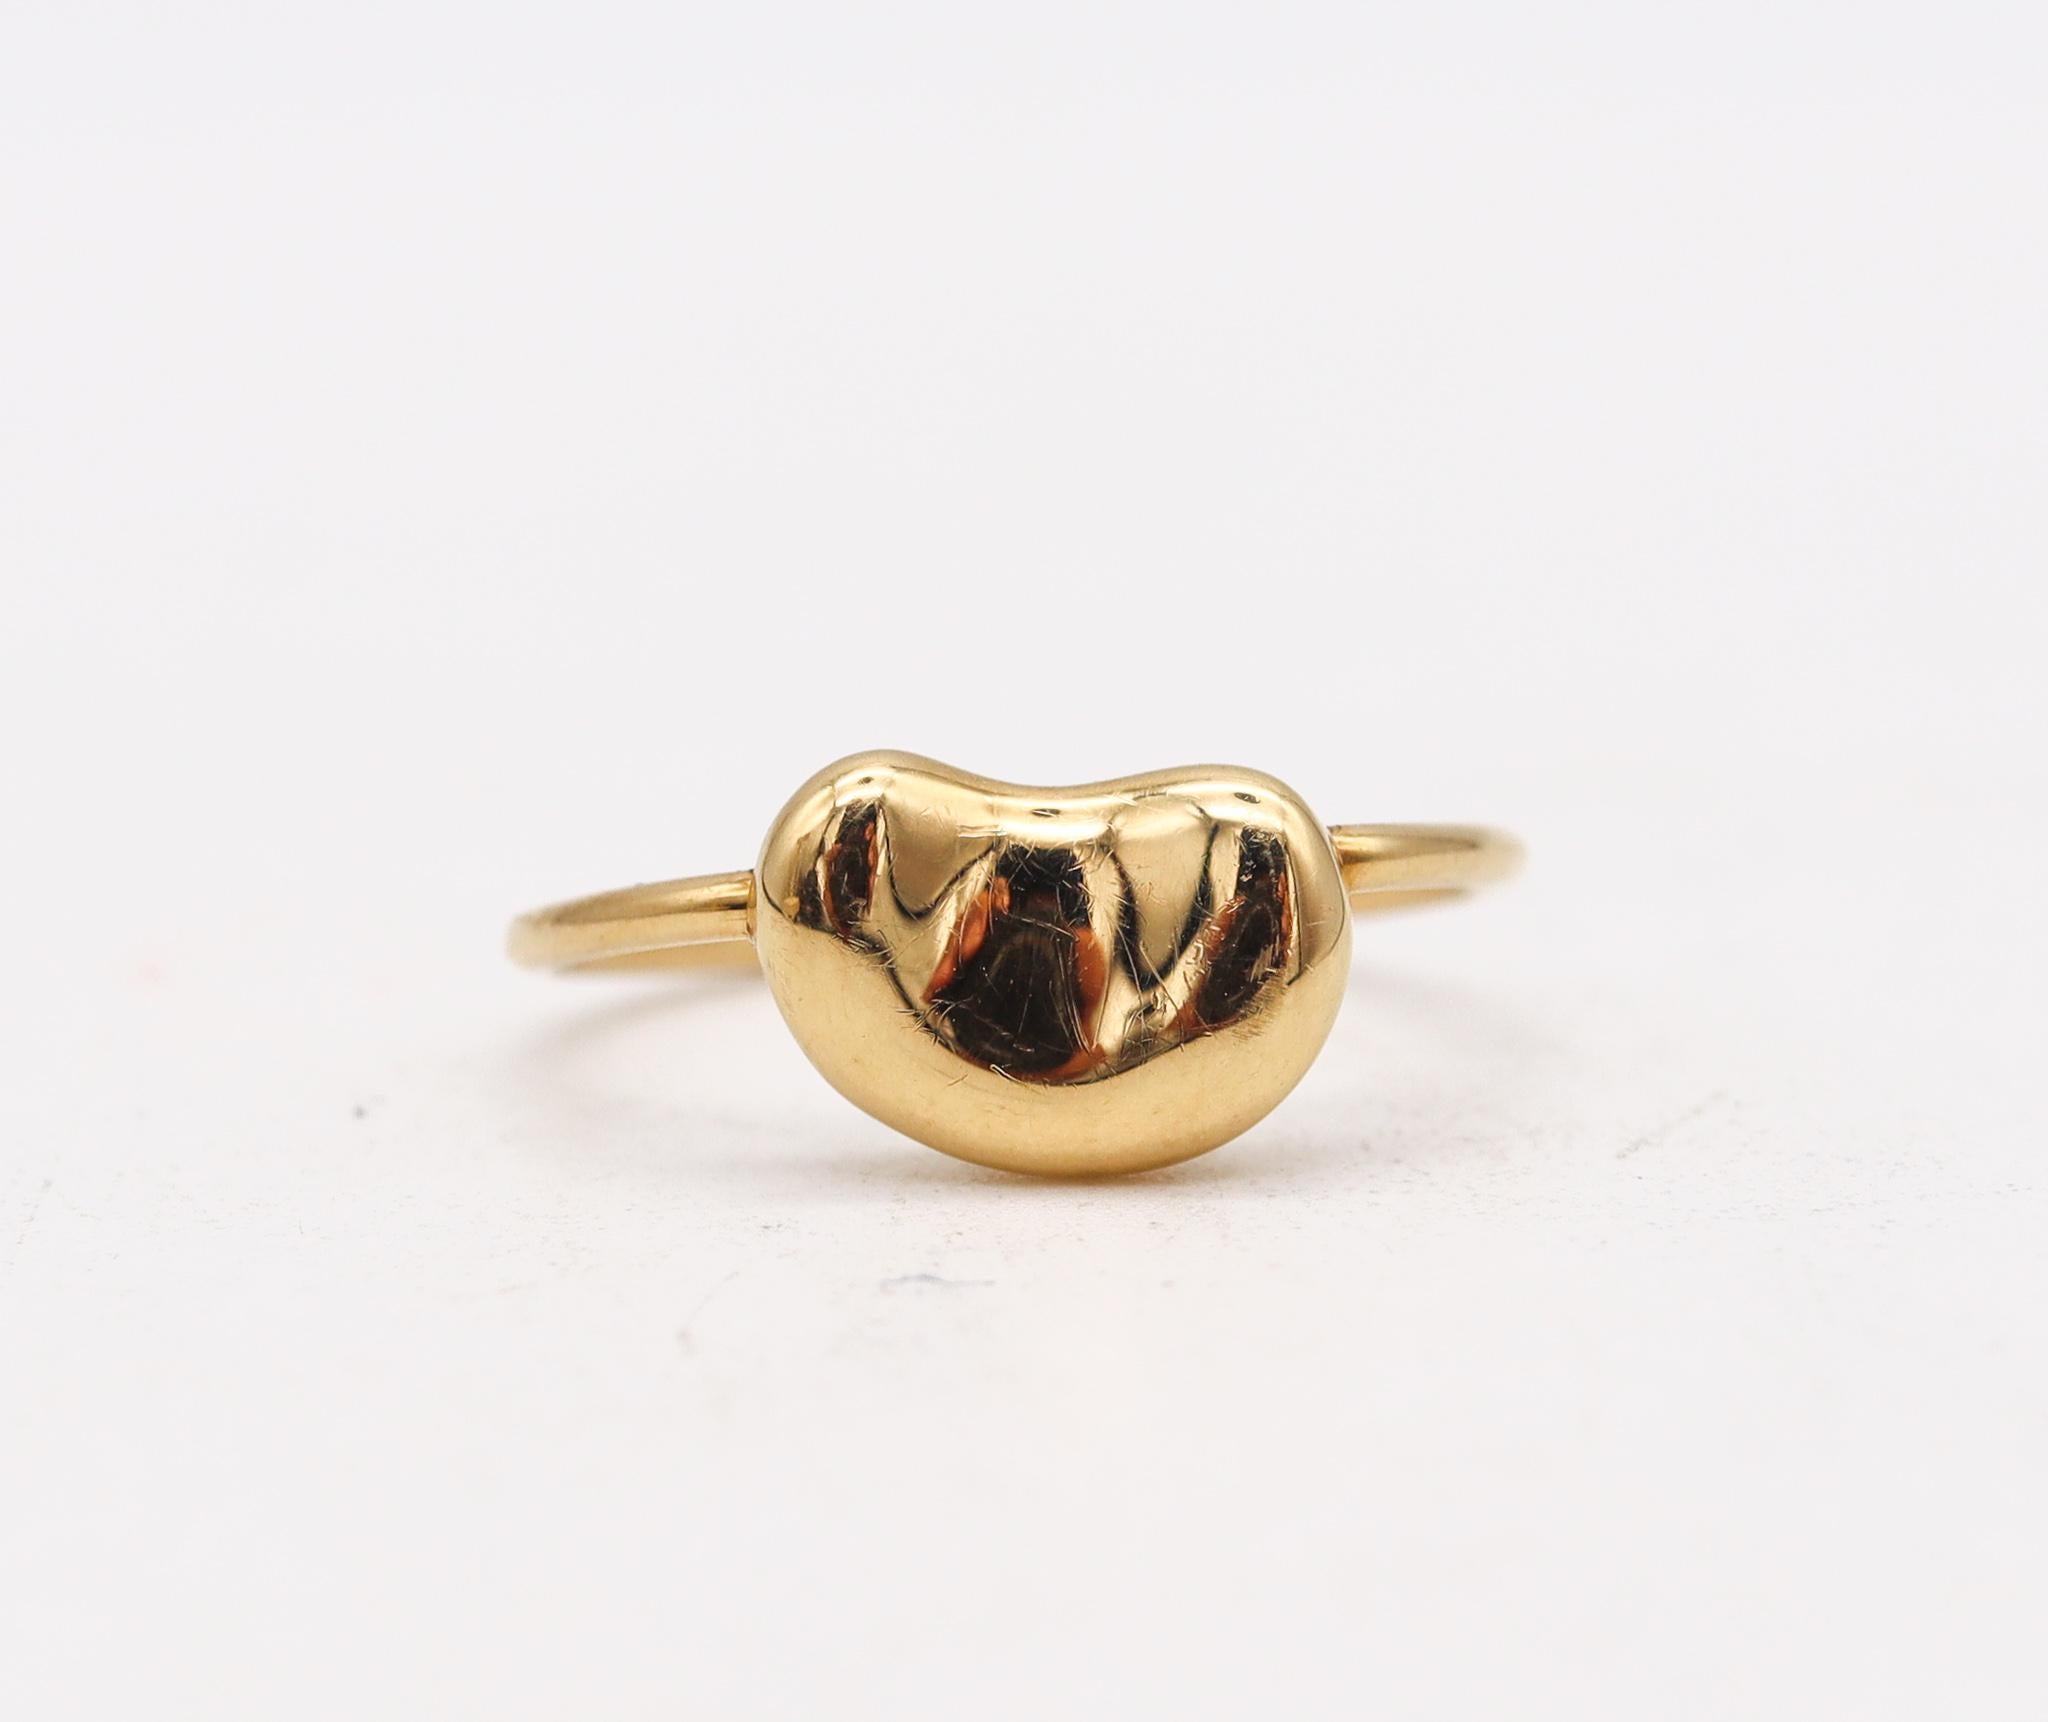 Kinetic bean ring designed by Elsa Peretti (1940-2021) for Tiffany & Co.

A vintage iconic bean ring, created in New York city at the Tiffany Studios in New York city by Elsa Peretti, back in the 1970's. This unusual free form movable ring is very